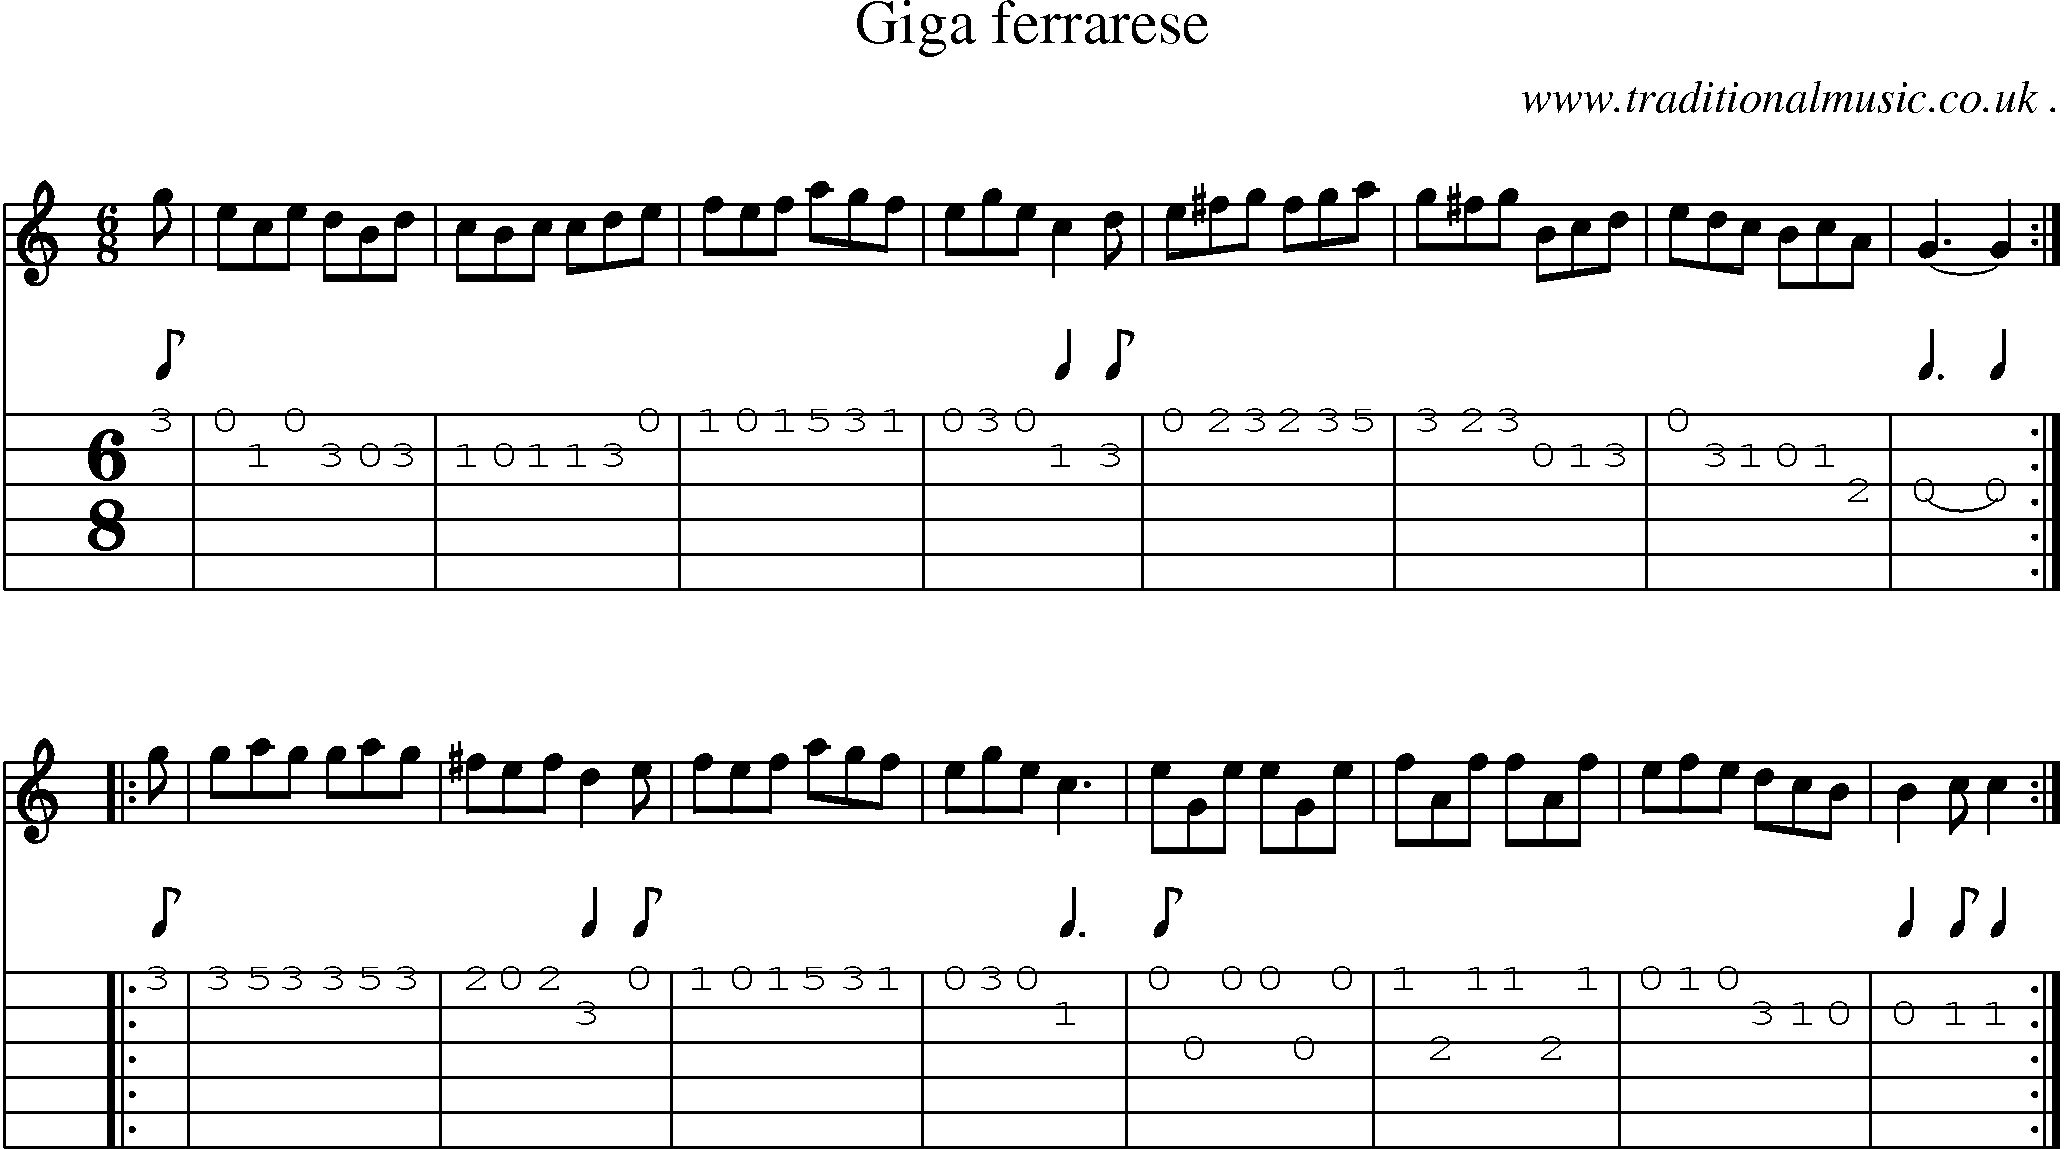 Sheet-Music and Guitar Tabs for Giga Ferrarese